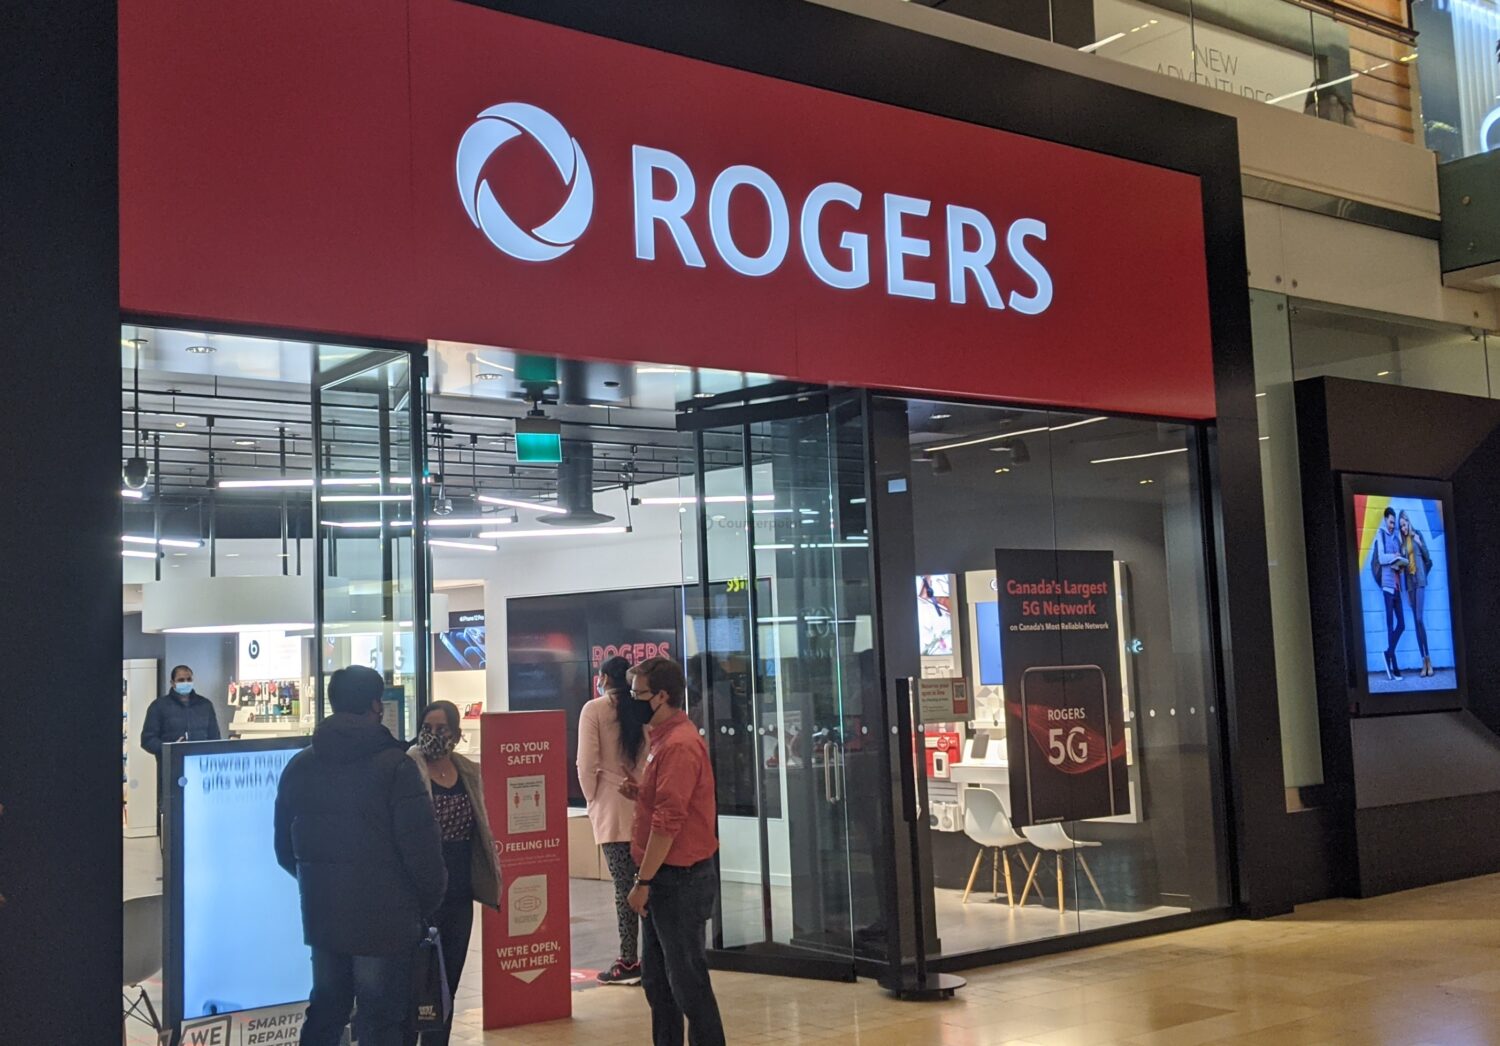 Rogers Looks to Strengthen 5G Position with Acquisition of Shaw